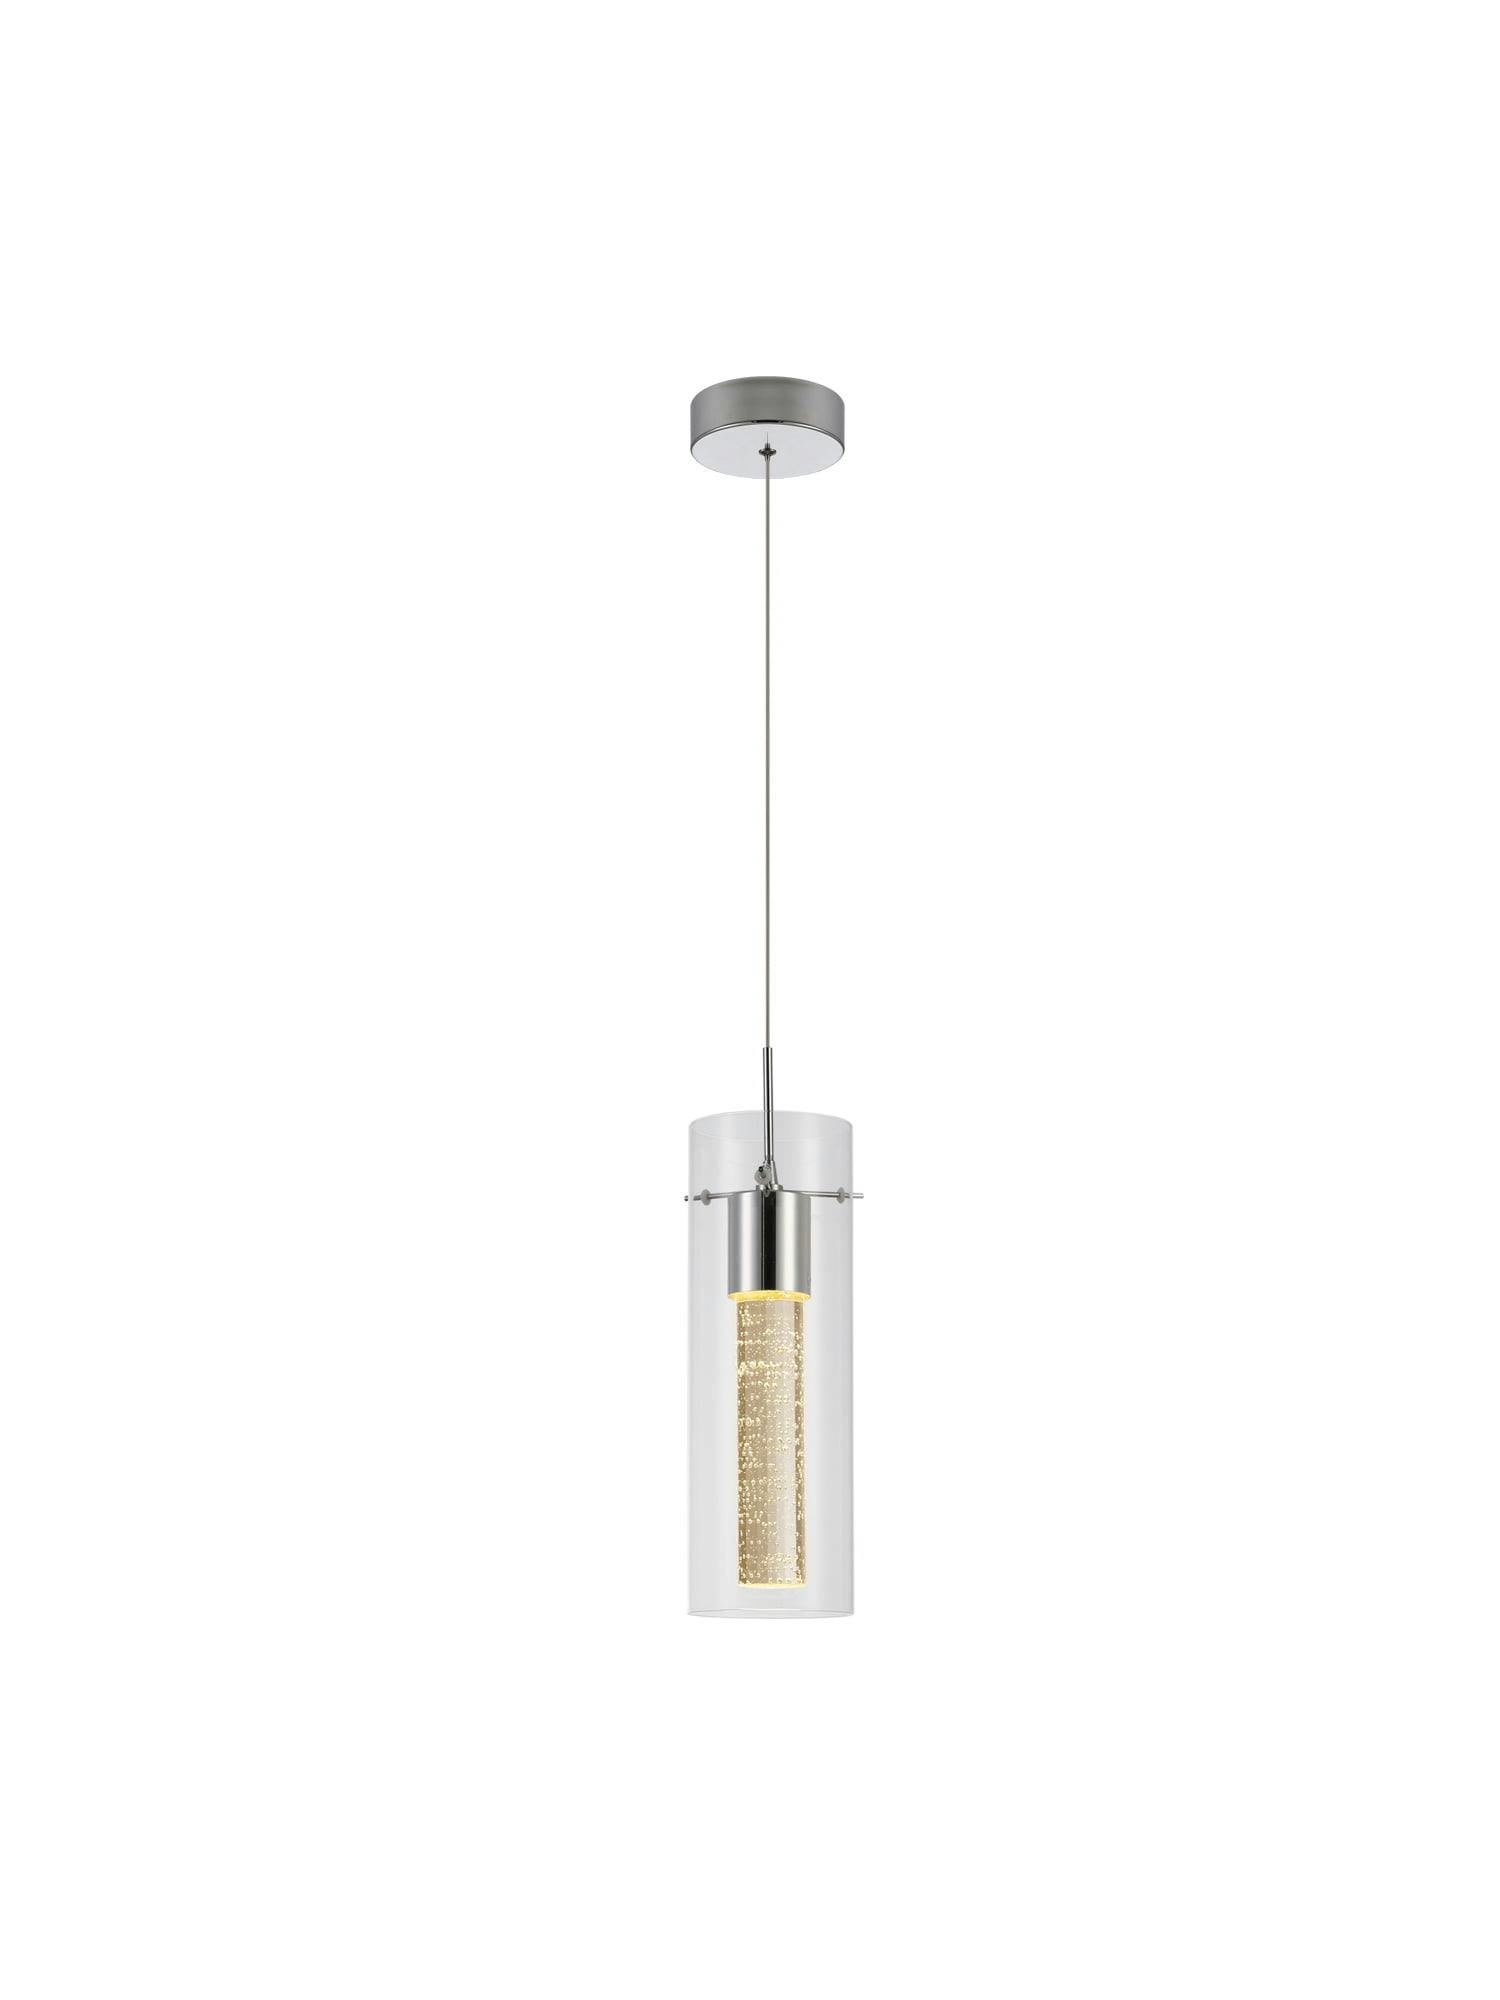 Defong Chrome Finish Cylinder Pendant Light with Integrated LED